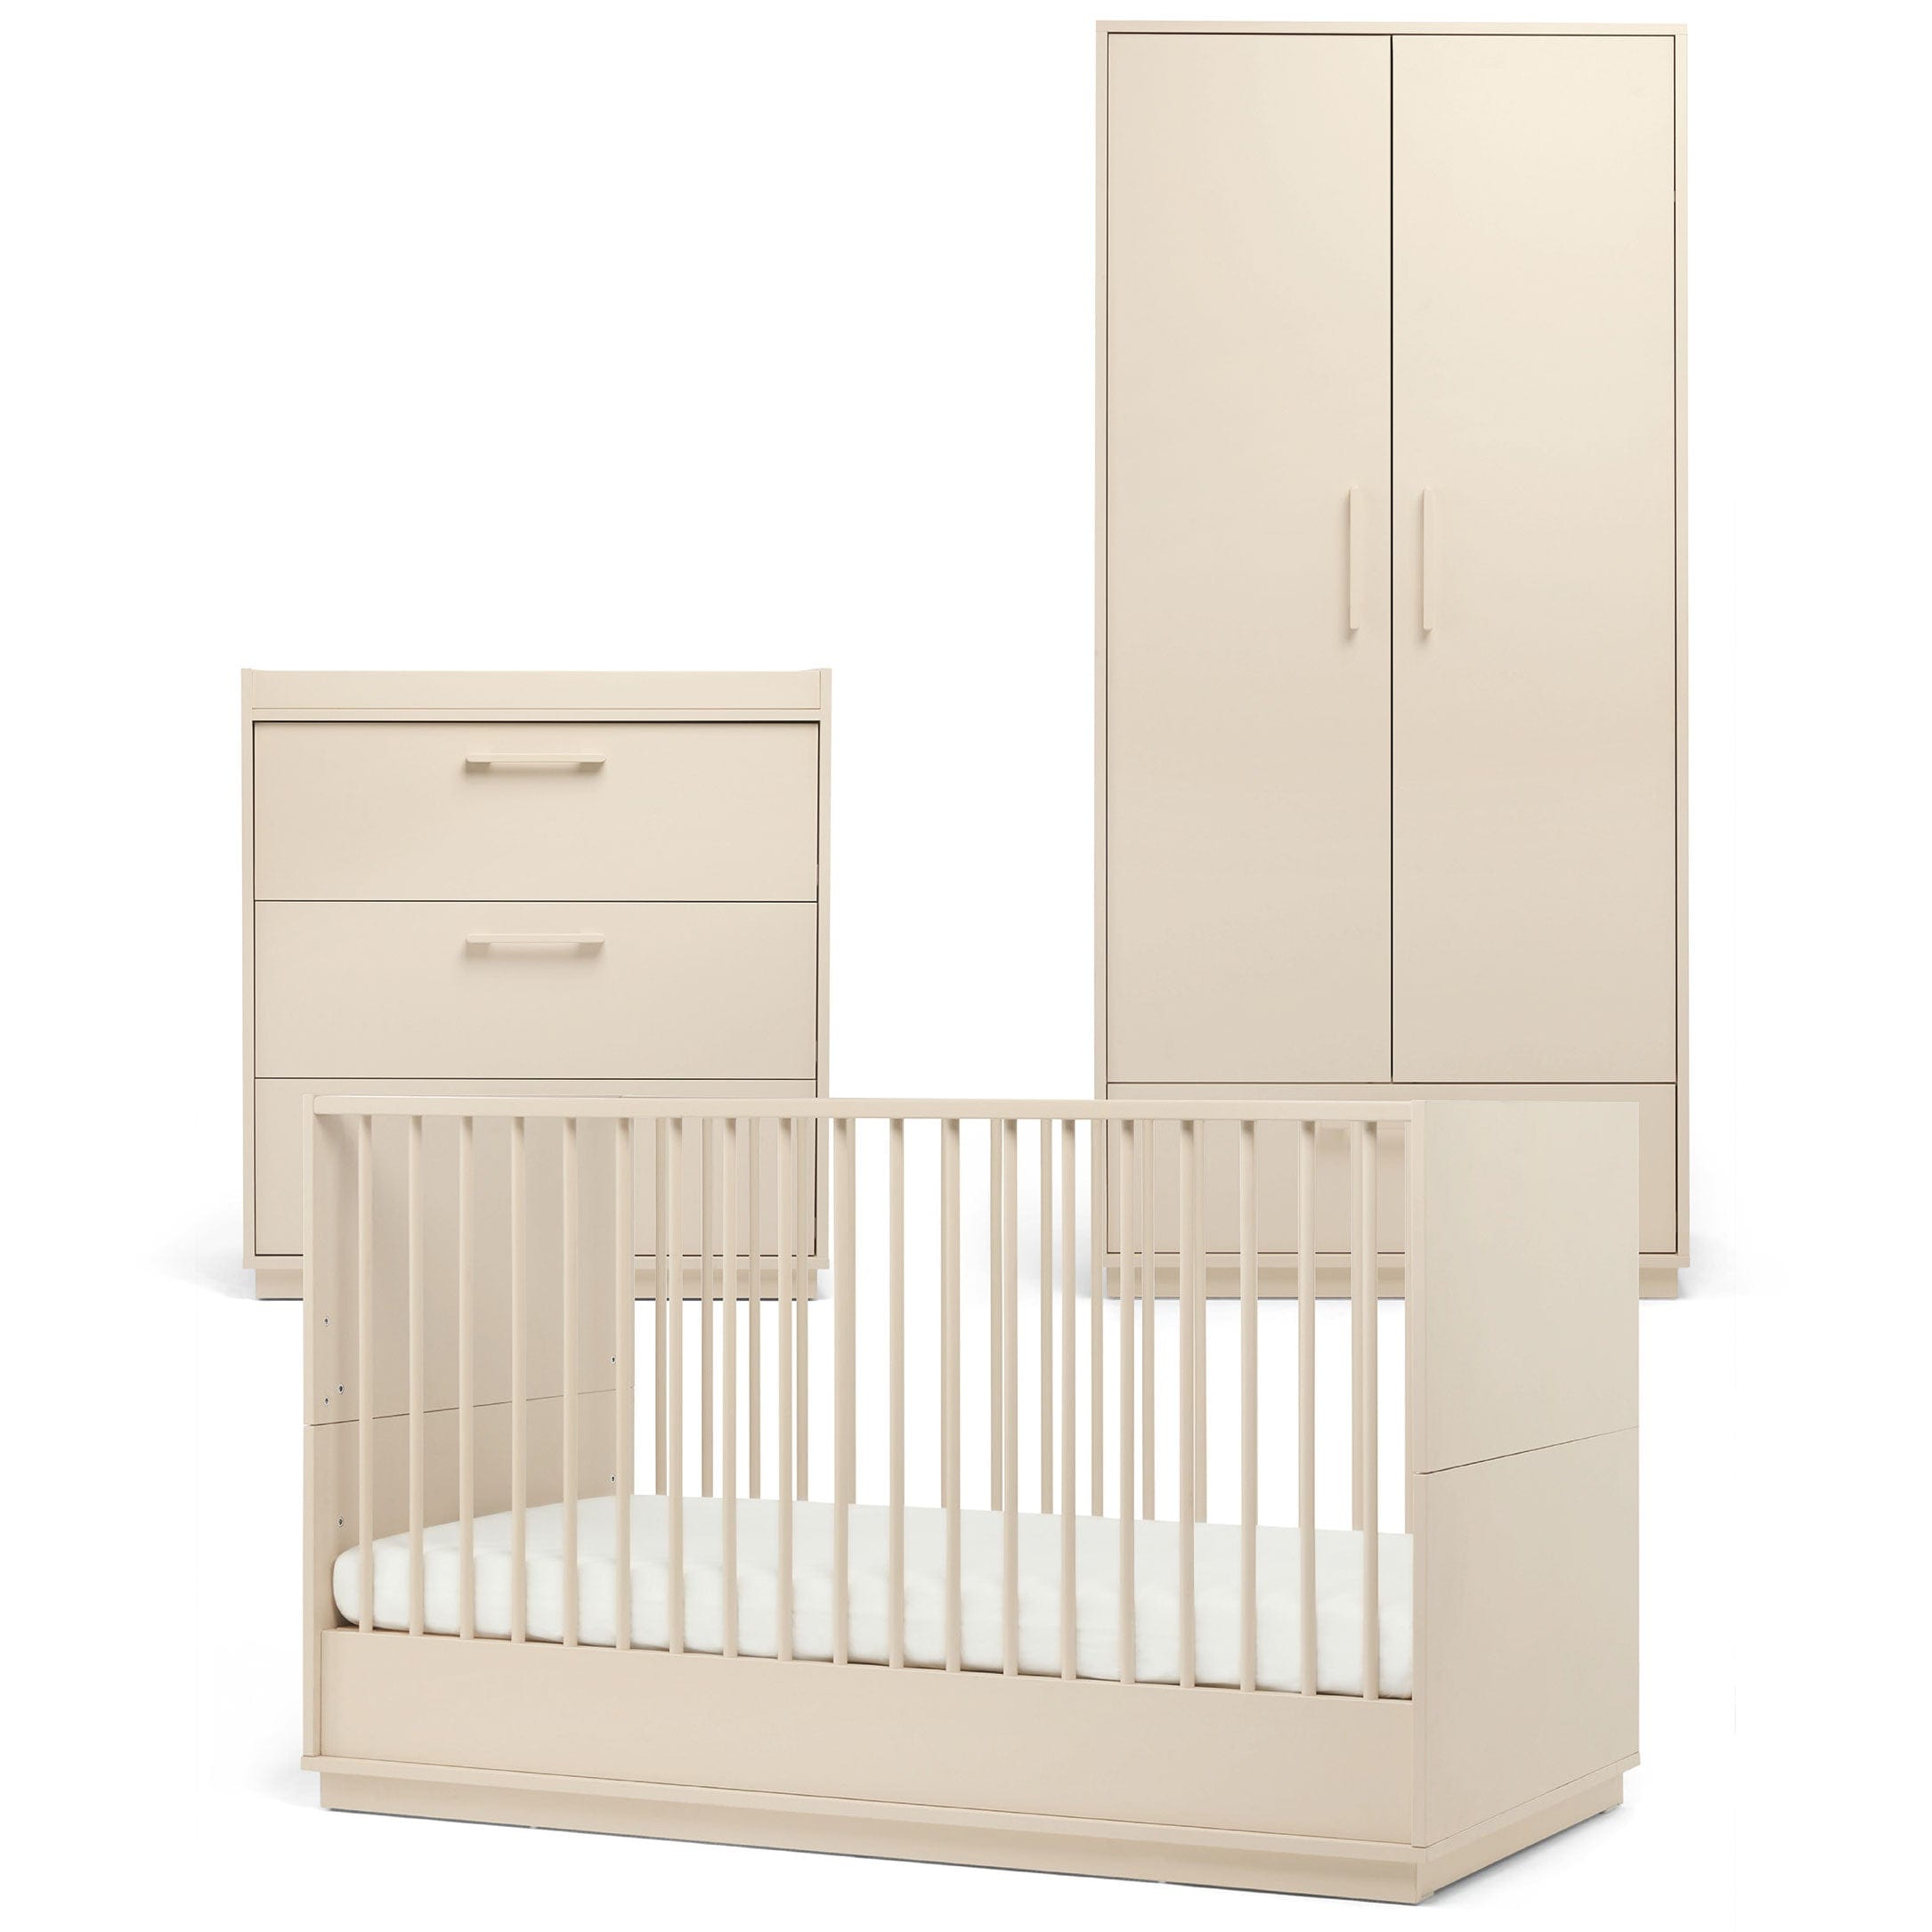 Mamas & Papas Flockton 3 Piece Cotbed Roomset in Cashmere Nursery Room Sets